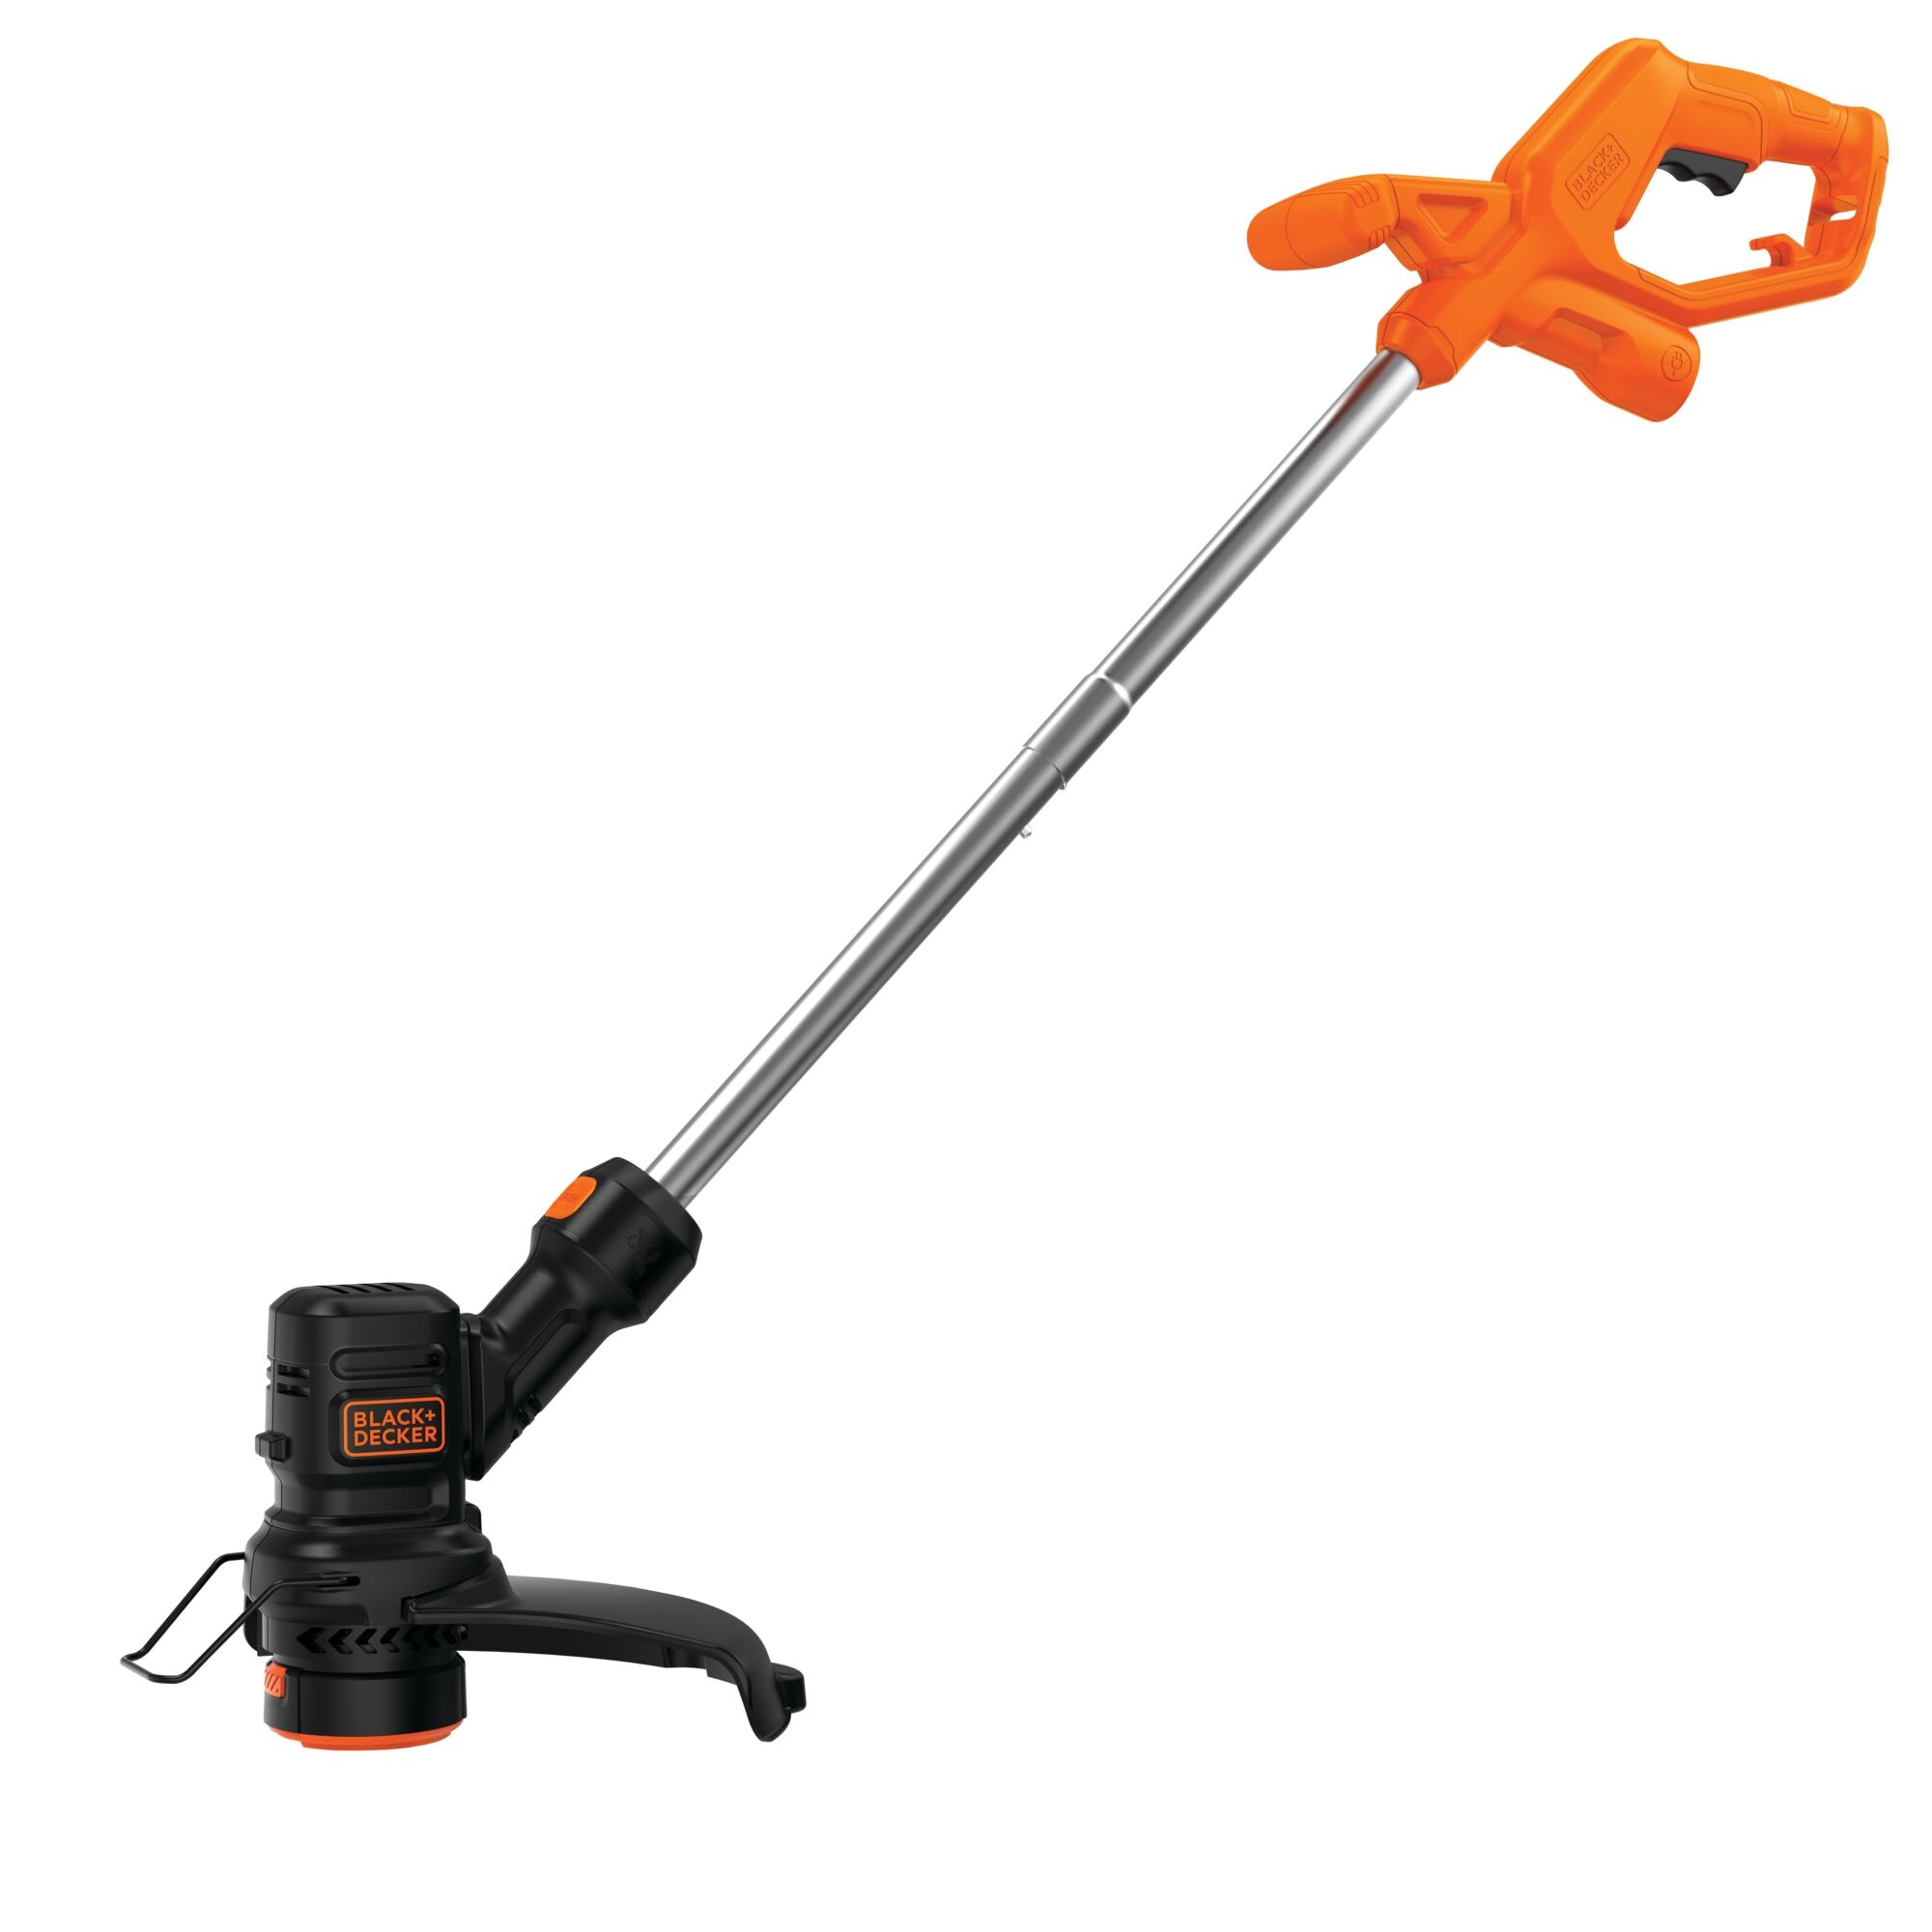 BLACK+DECKER 13 in. 4.0 Amp Corded Electric Straight Shaft Single